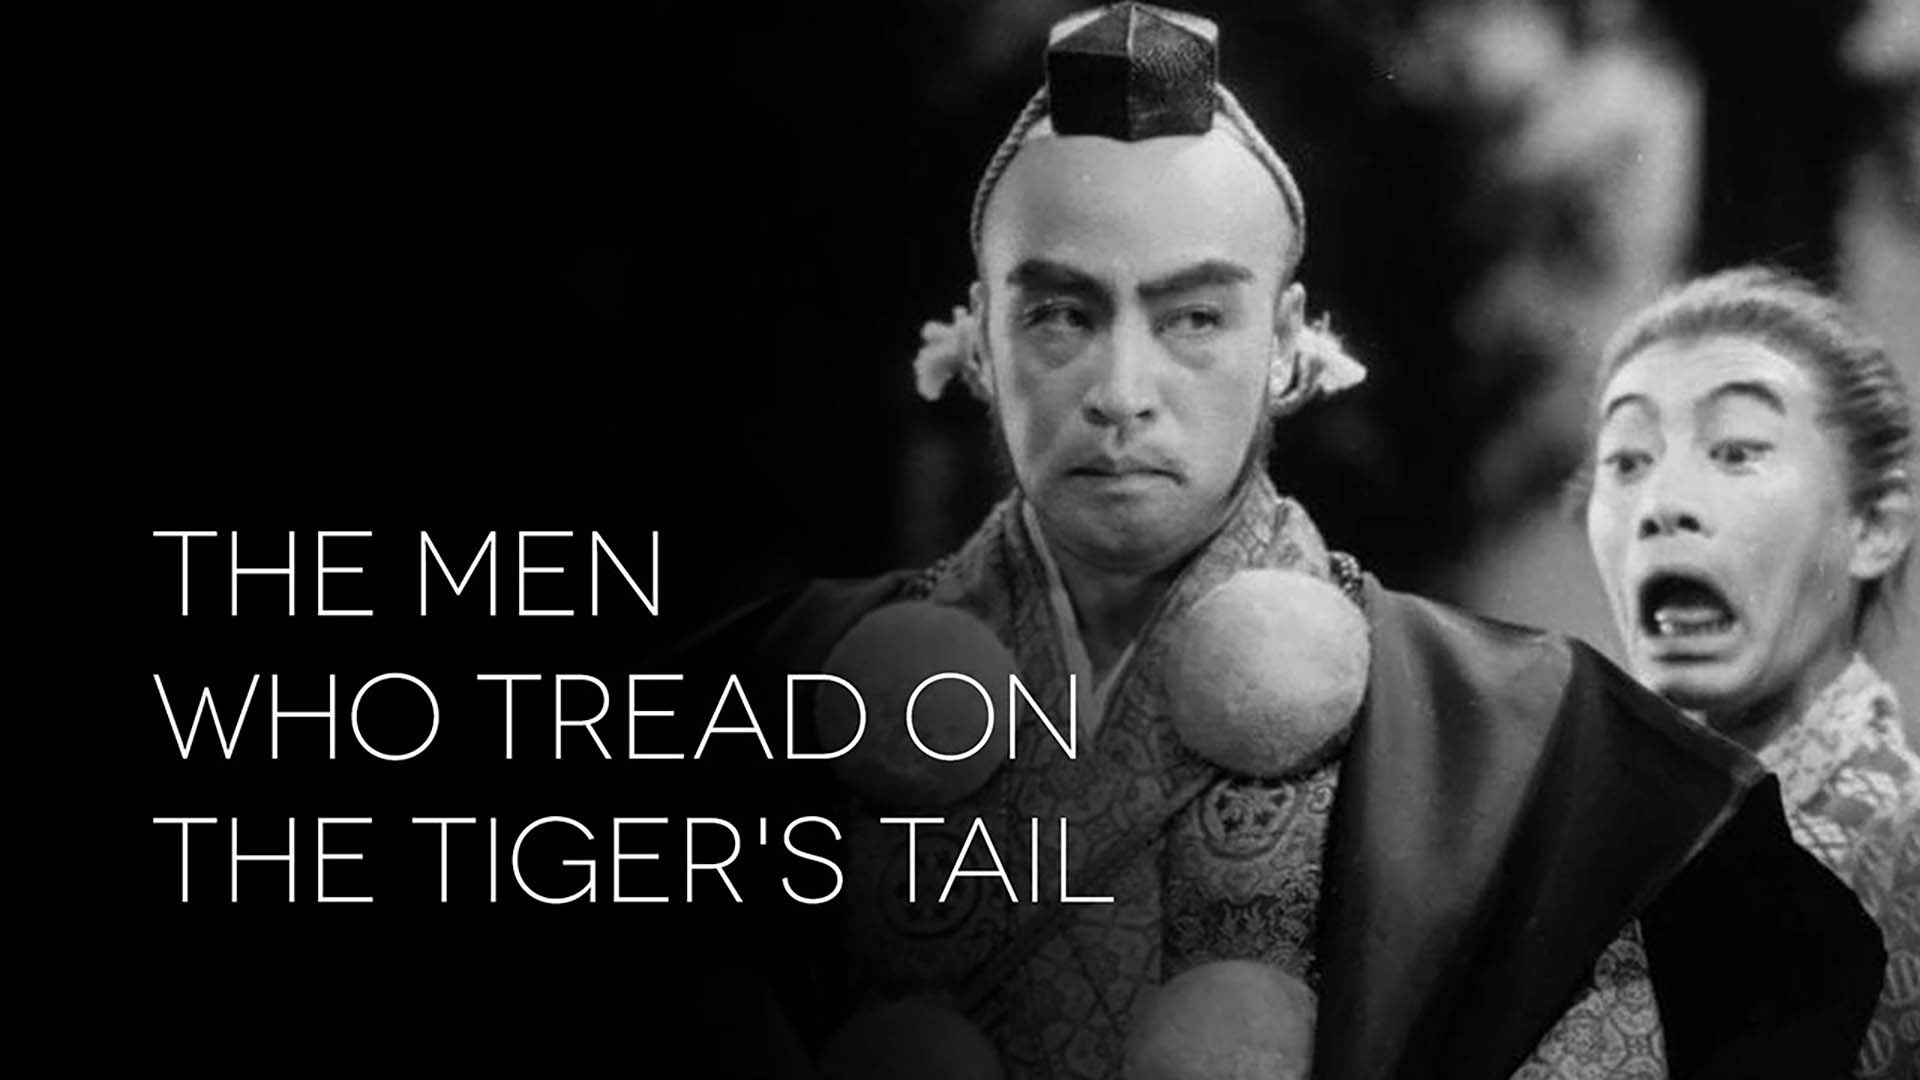 48-facts-about-the-movie-the-men-who-tread-on-the-tigers-tail